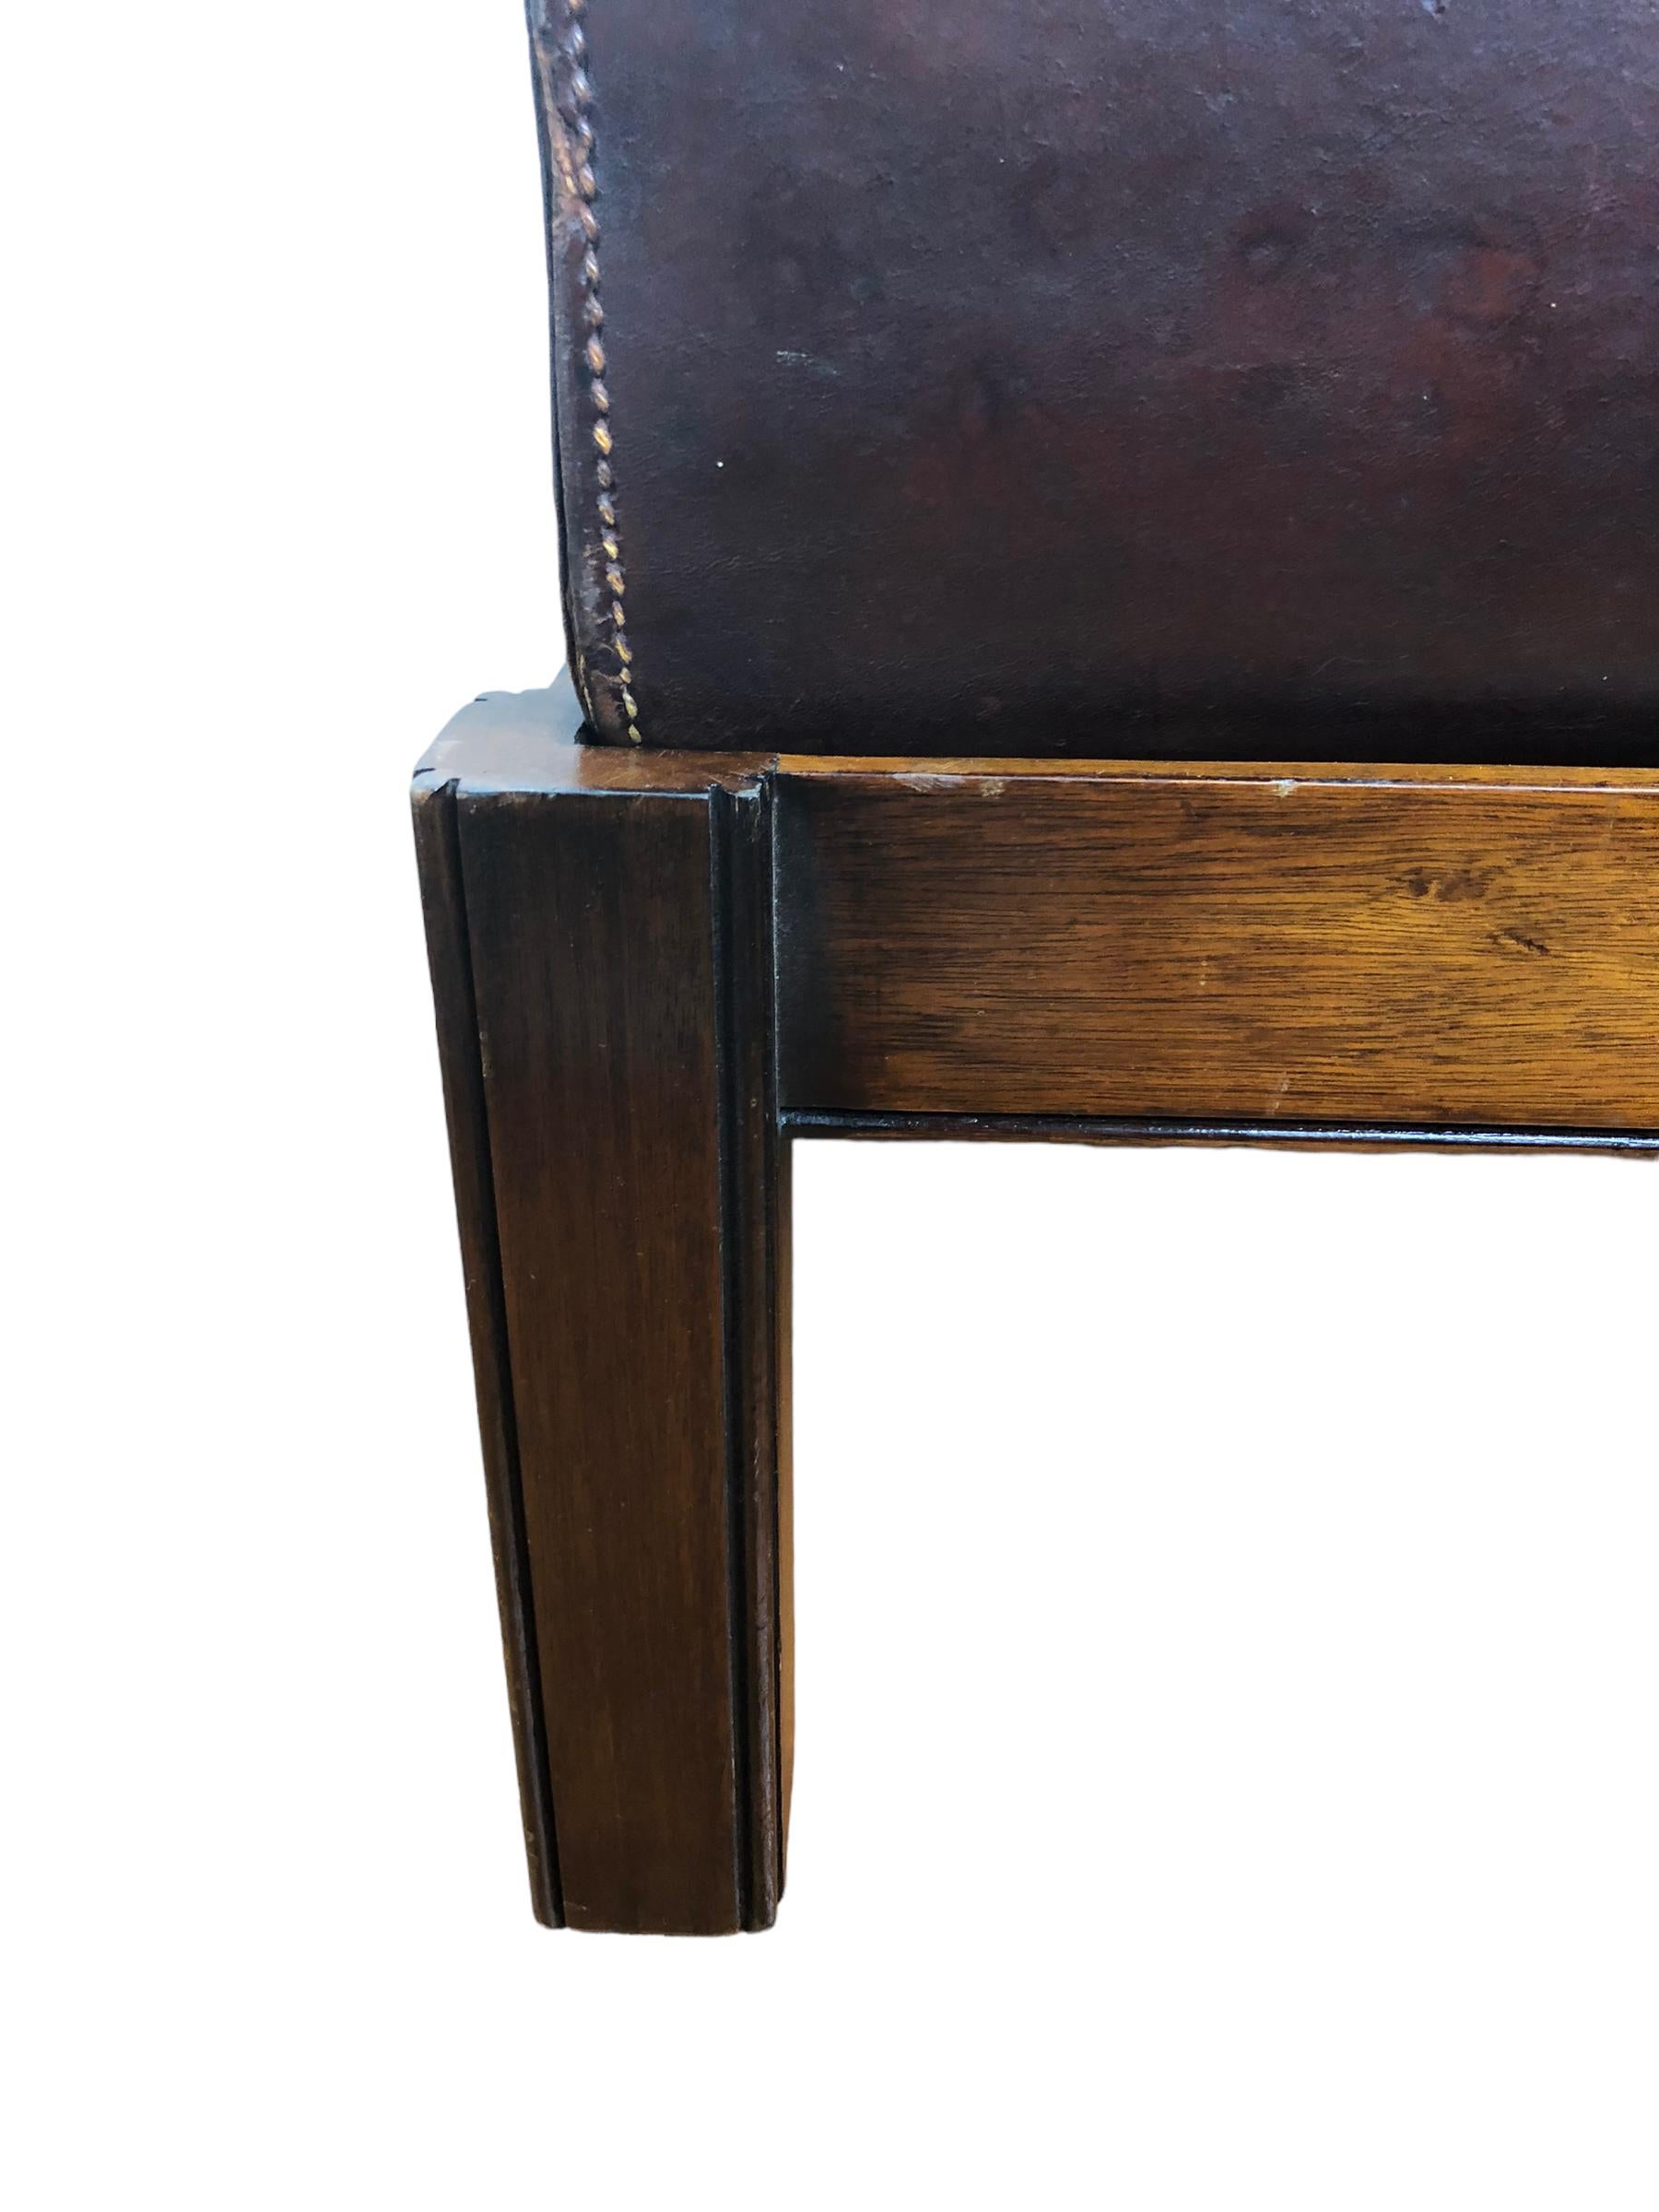 1900’s English leather box or trunk mounted on a custom mahogany frame to make a beautiful side table. Box opens to reveal plenty of room for storage. 
Wear to leather. Leather has scuffs and separation